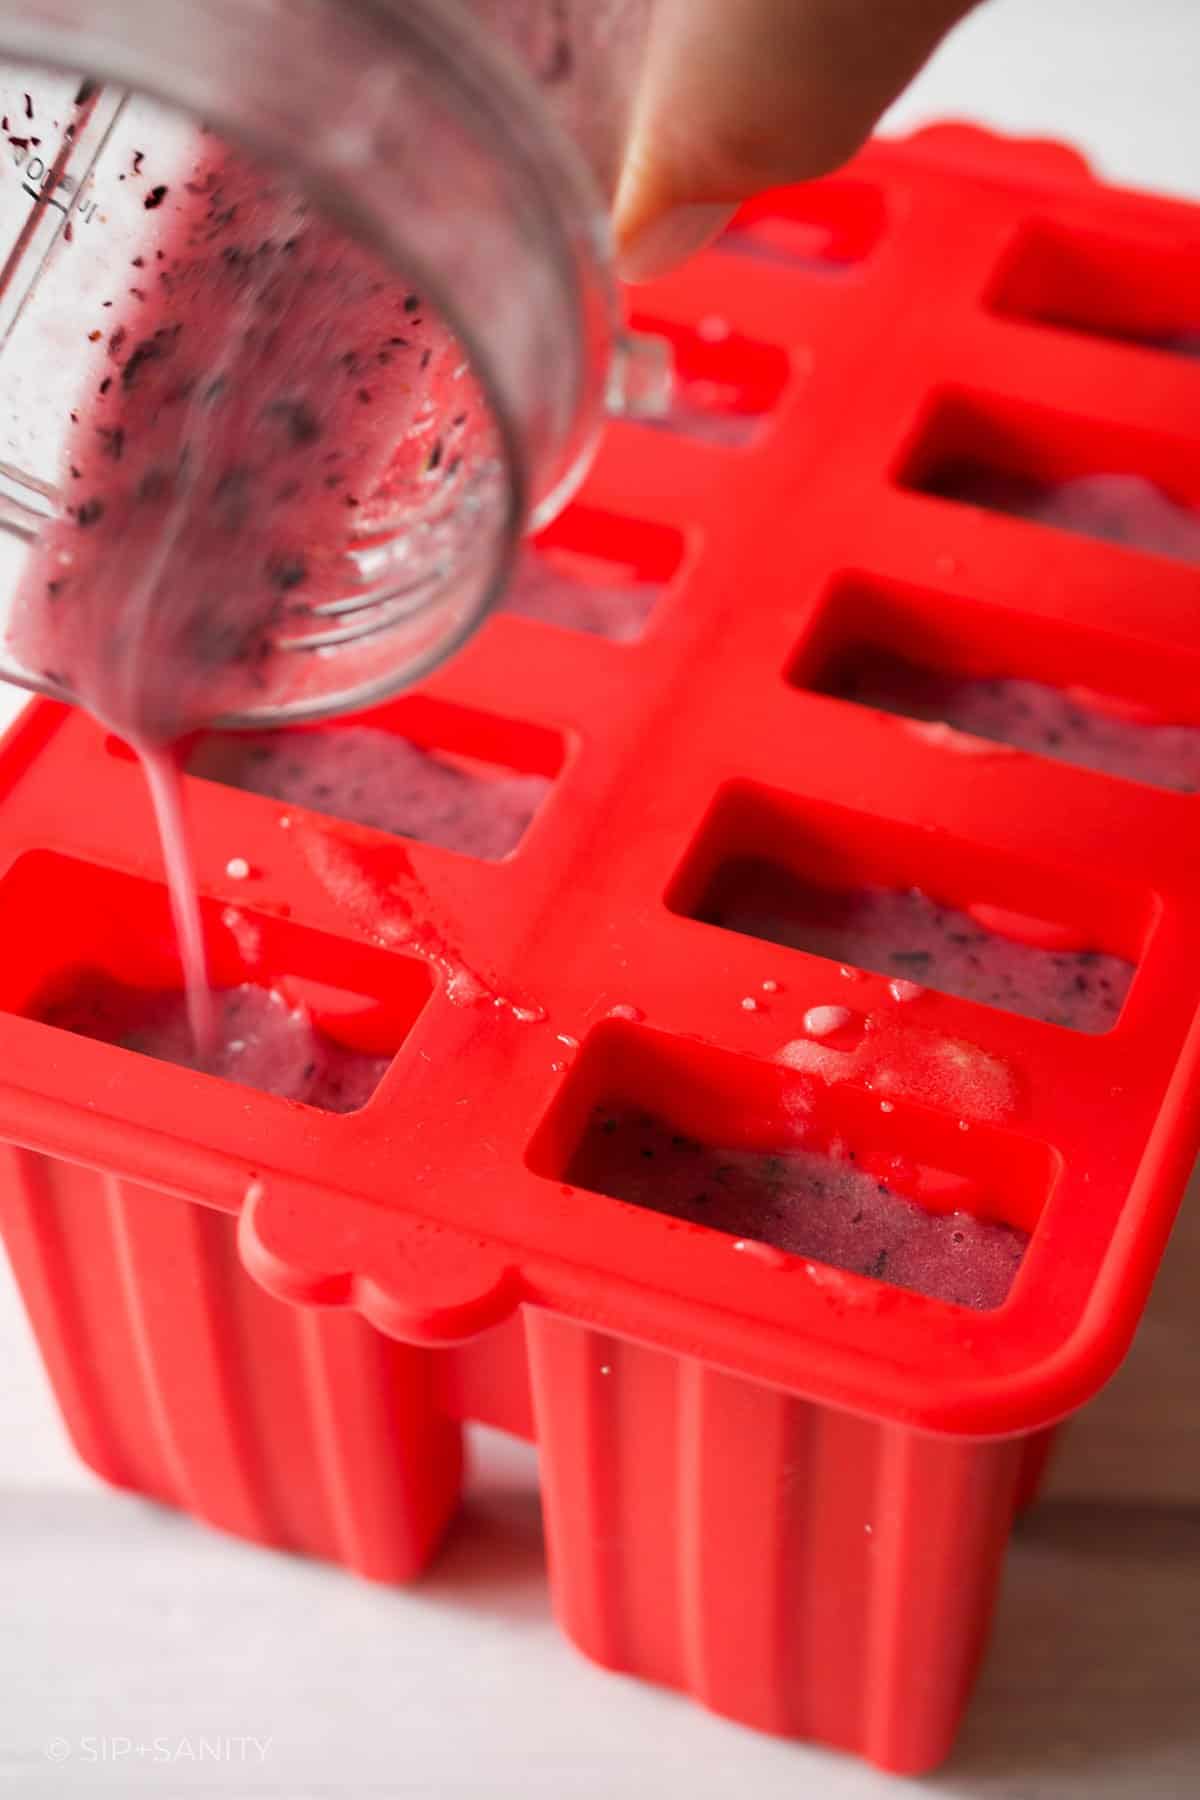 Pouring blueberry puree into popsicle molds.